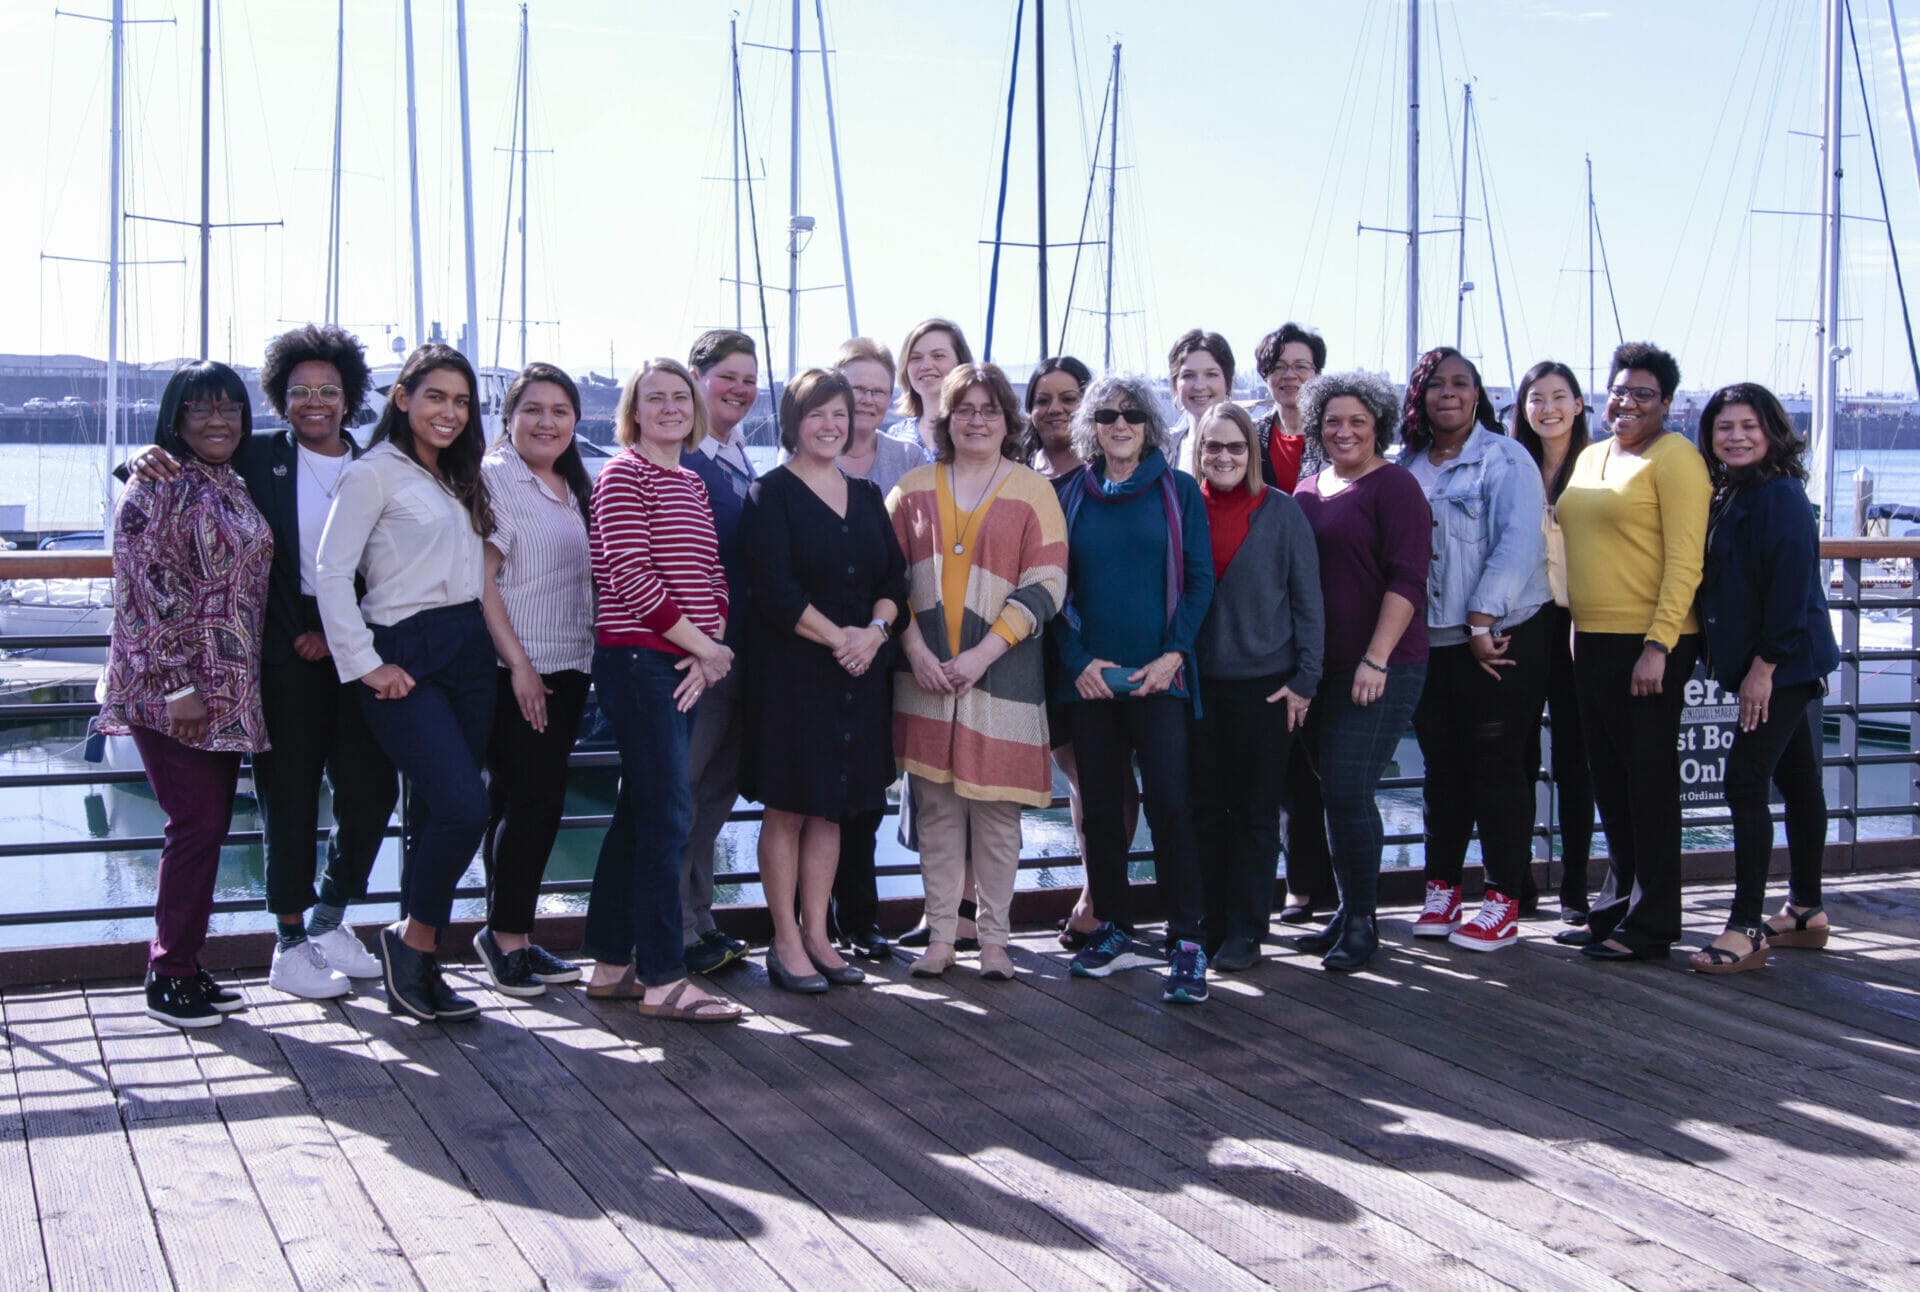 A group of women standing in front of a sailing boat dock